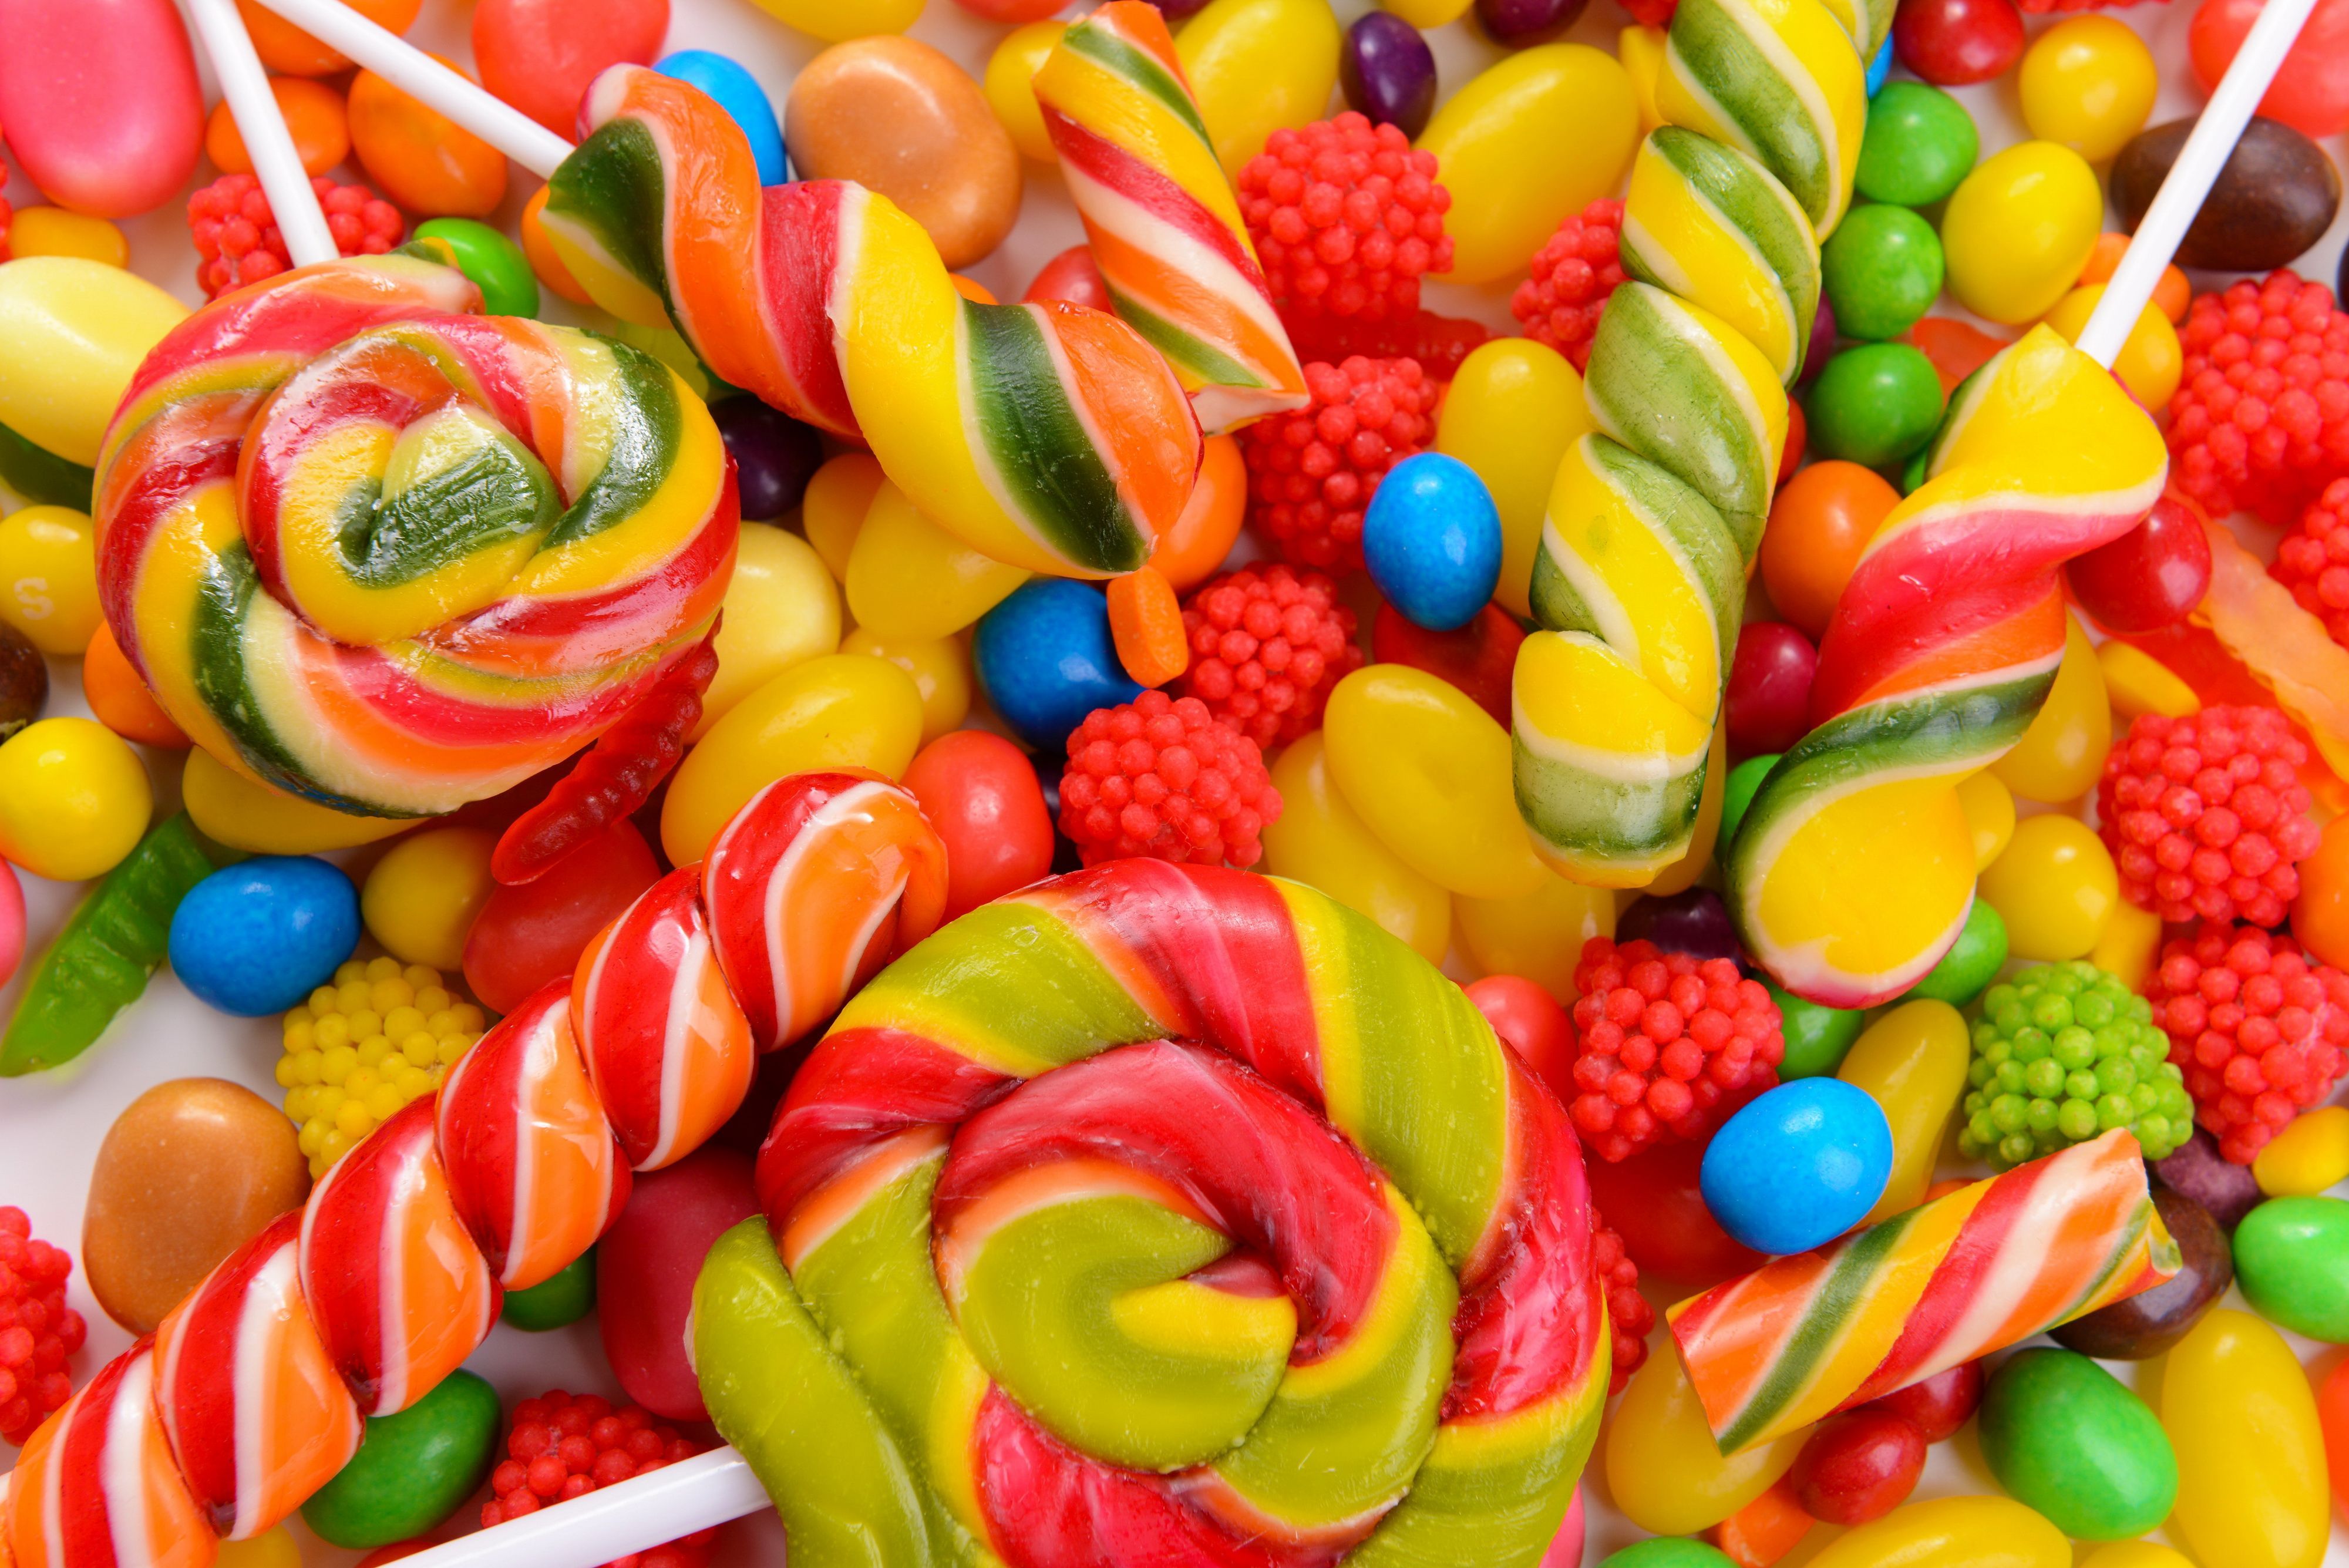 Wallpapers Sweets Candy Many Food Image Download.